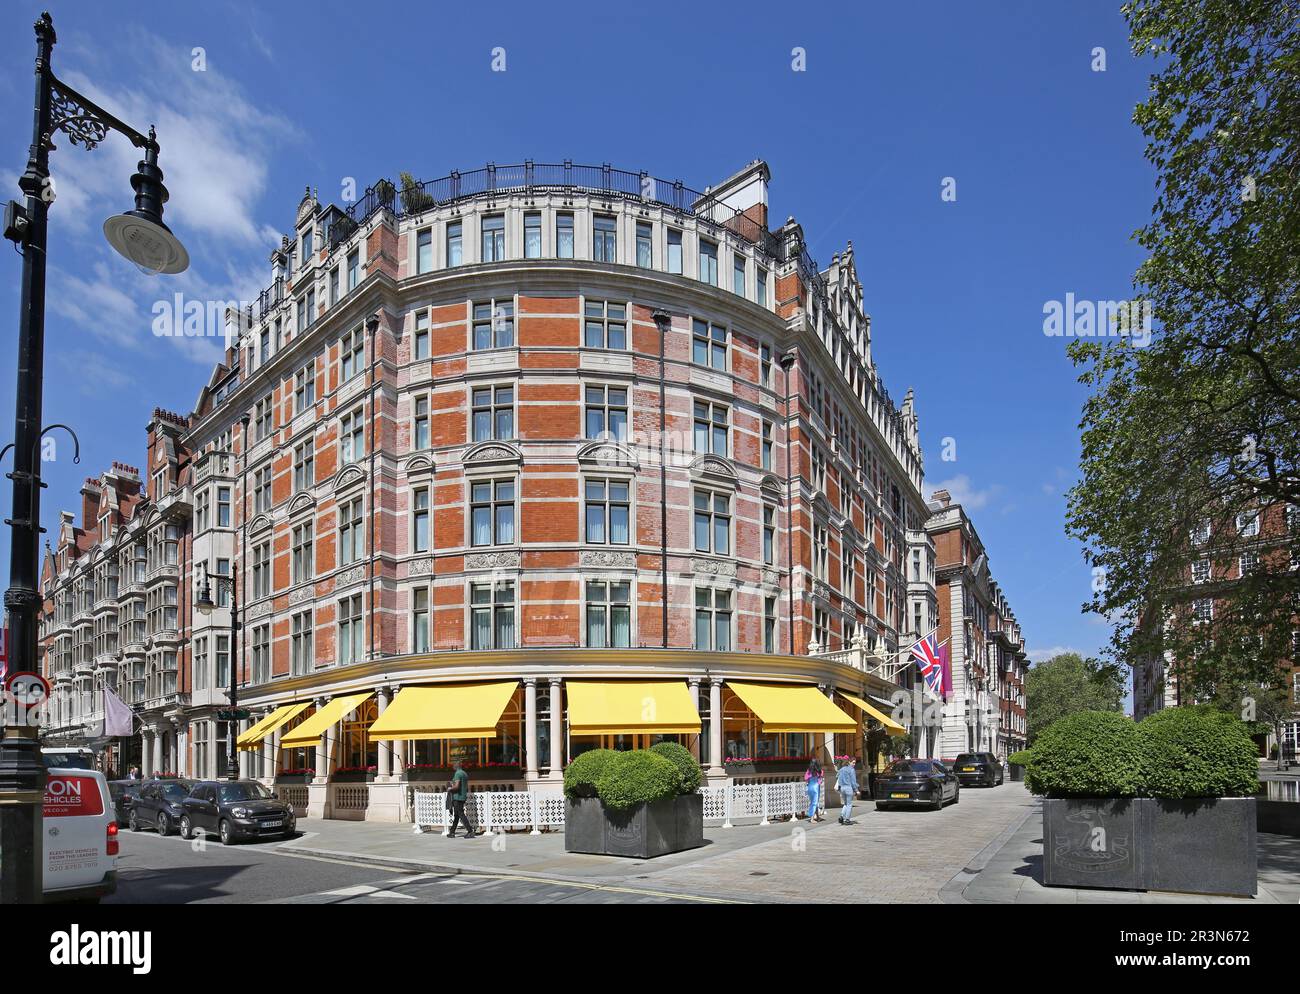 Exterior view of the luxury Connaught Hotel, Mayfair, London, UK.  Located on the corner of  Carlos Place and Mount street. Stock Photo